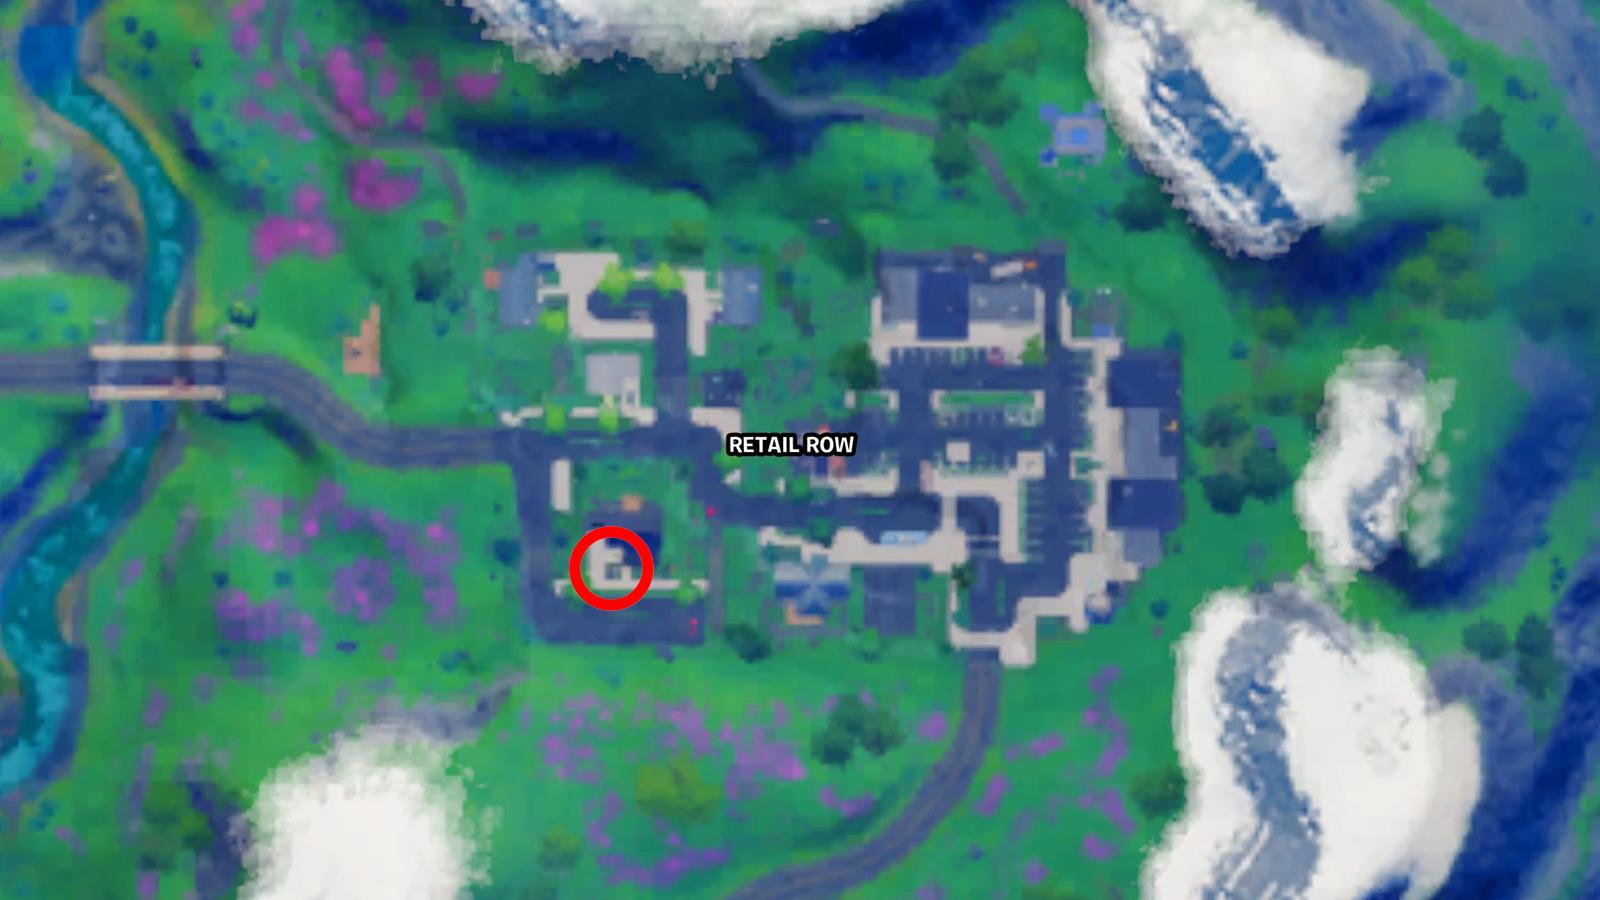 Fortnite Blue Coin location Retail Row